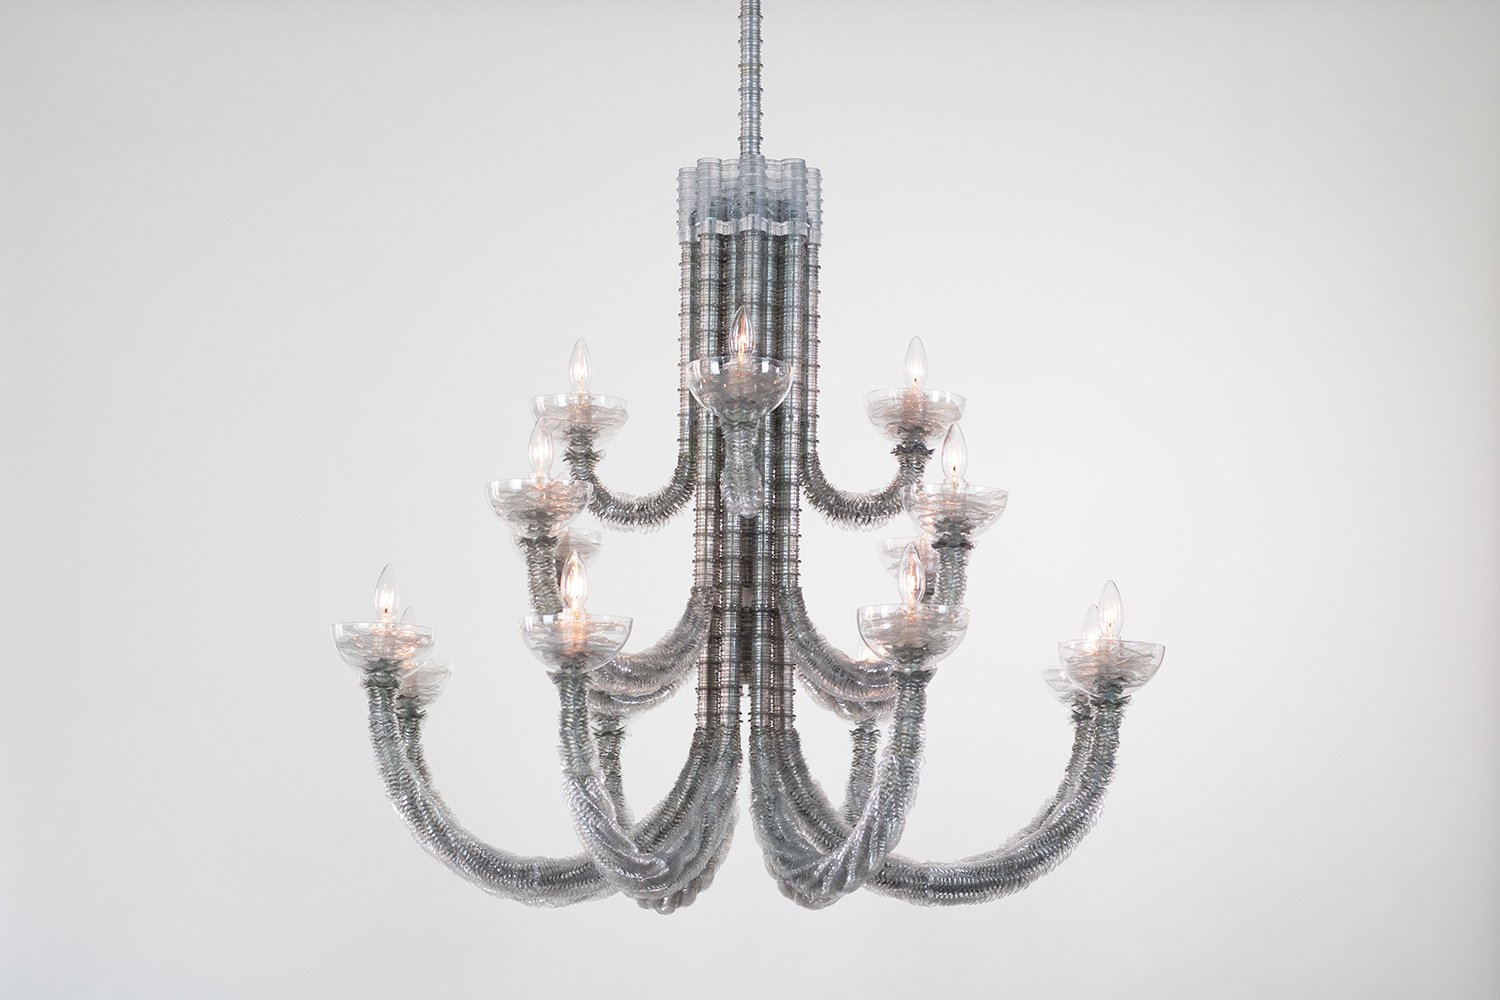 chandelier-2021-thierry-jeannot-photography-yvan-robledo-©thierryjeannot©marionfriedmanngallery-STR-0333-lr.jpg